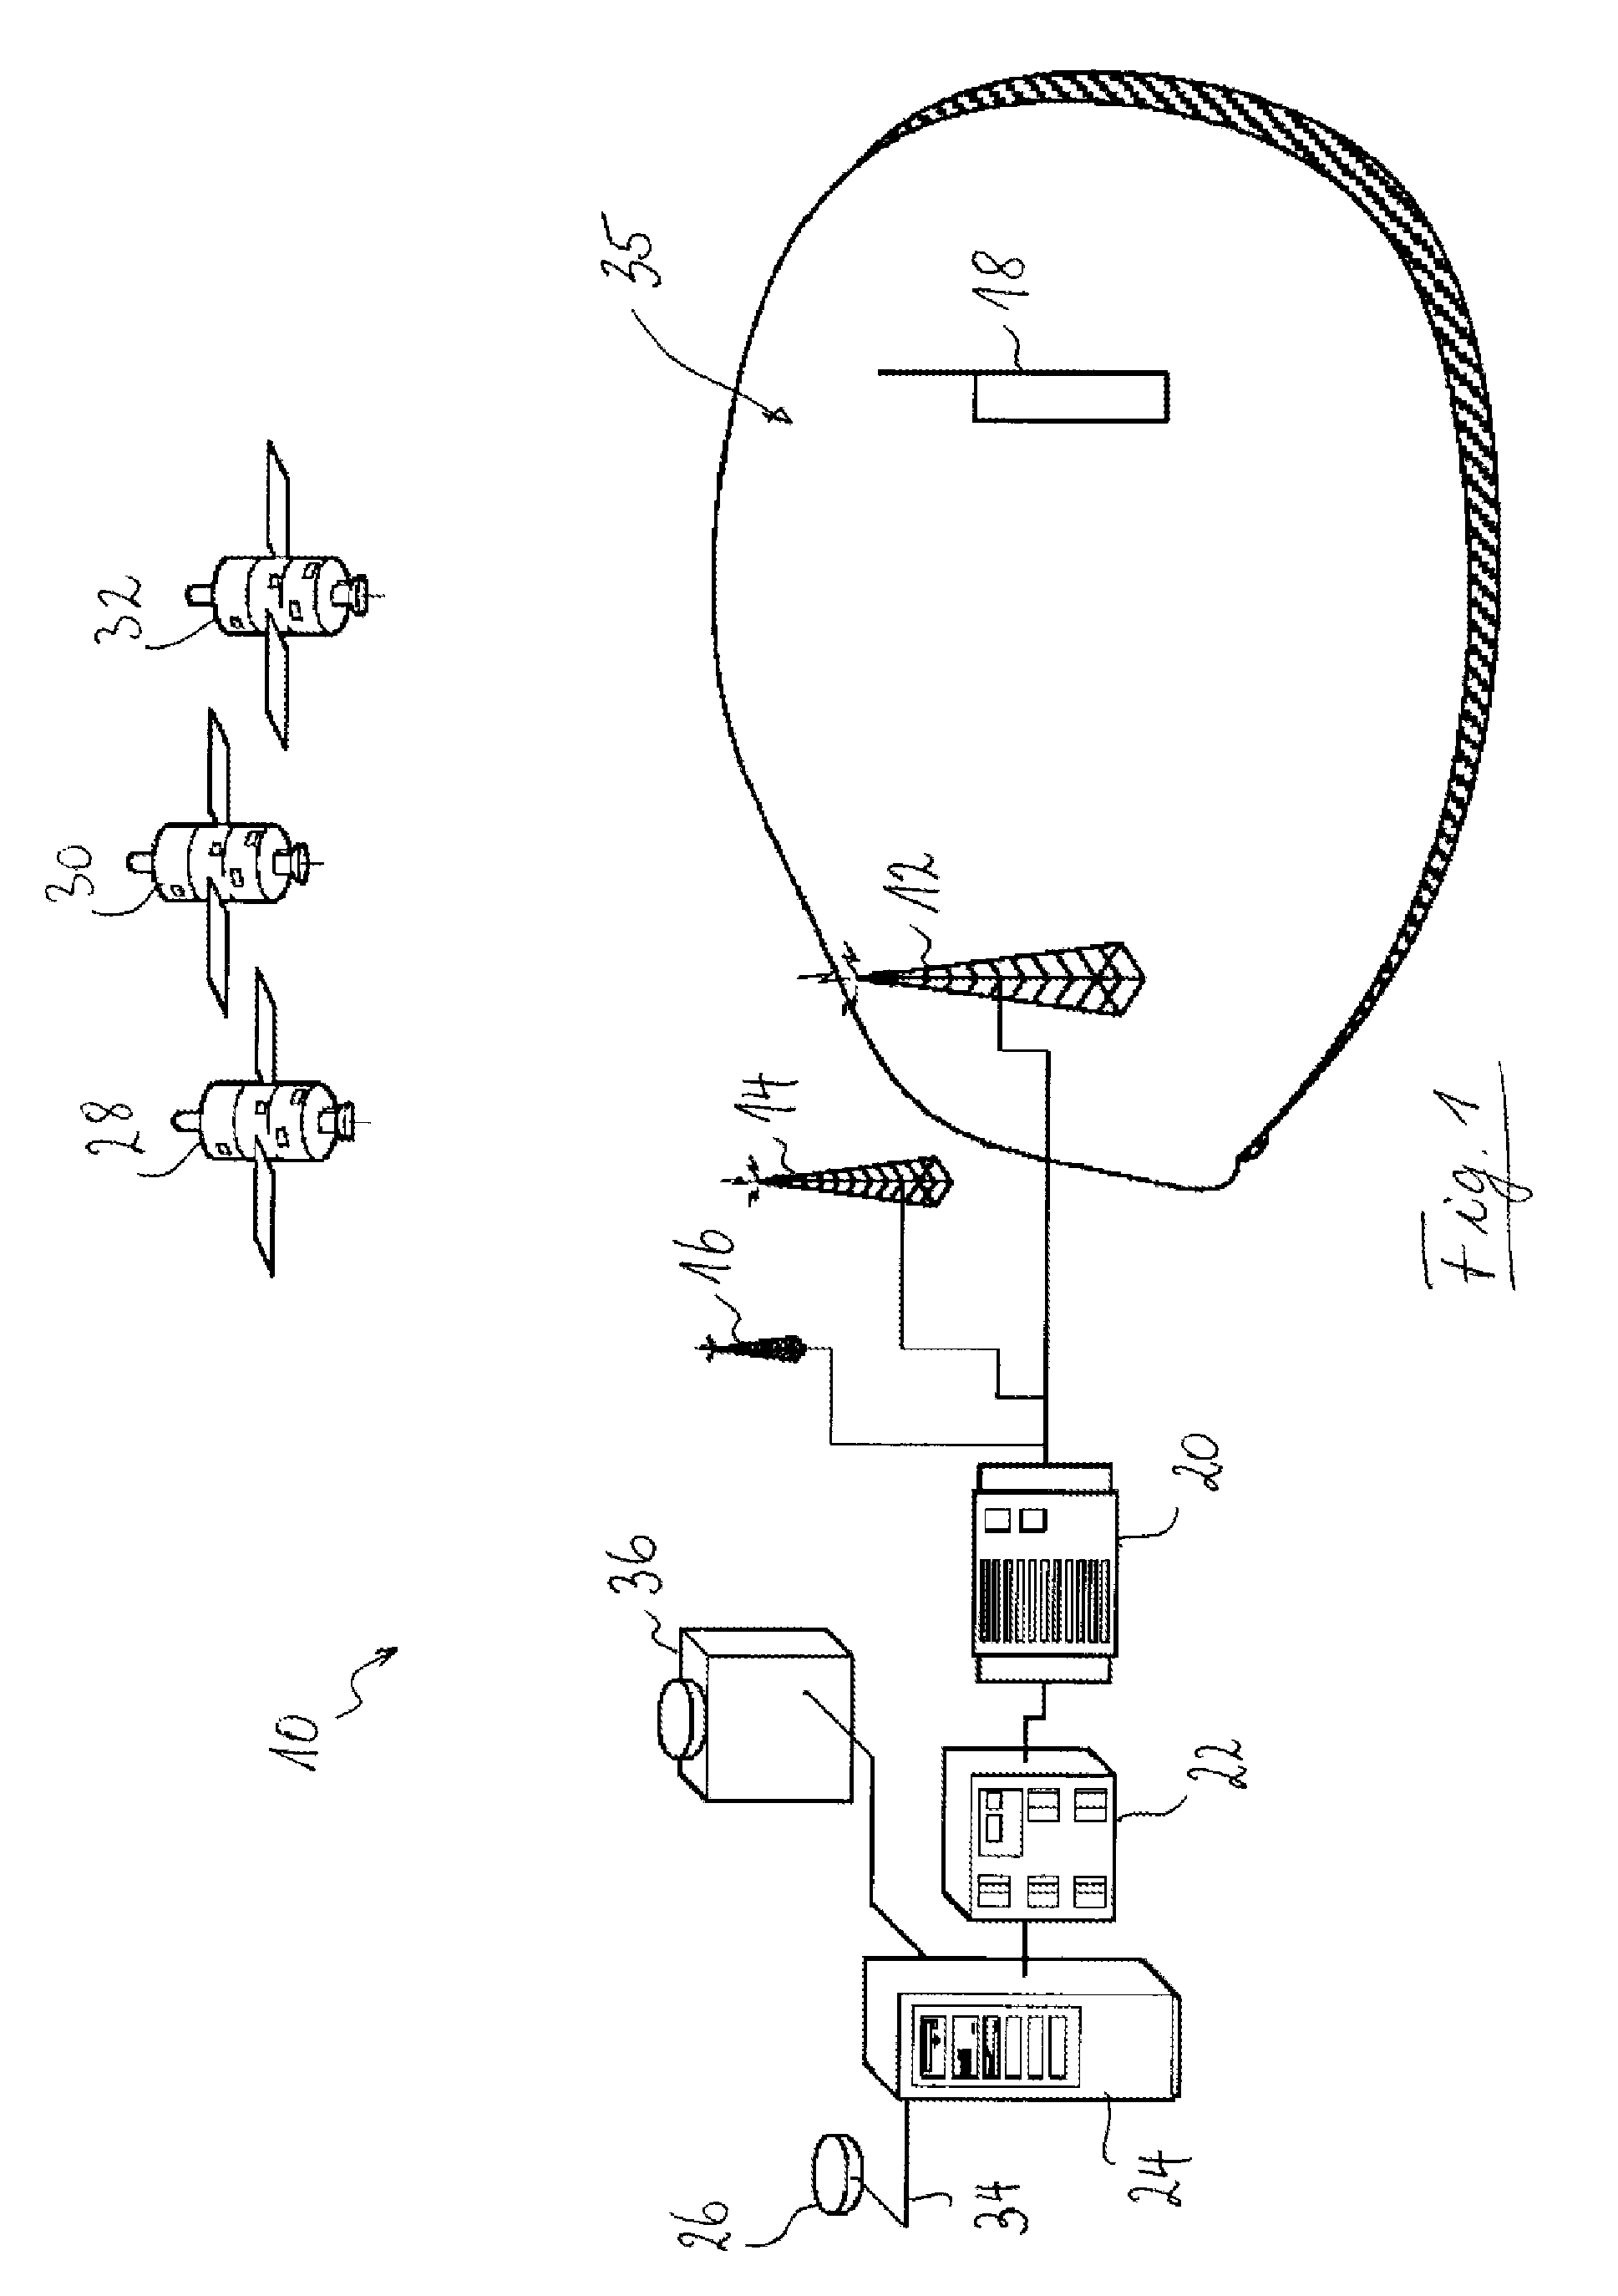 Method for providing assistance data to mobile station of a satellite positioning system